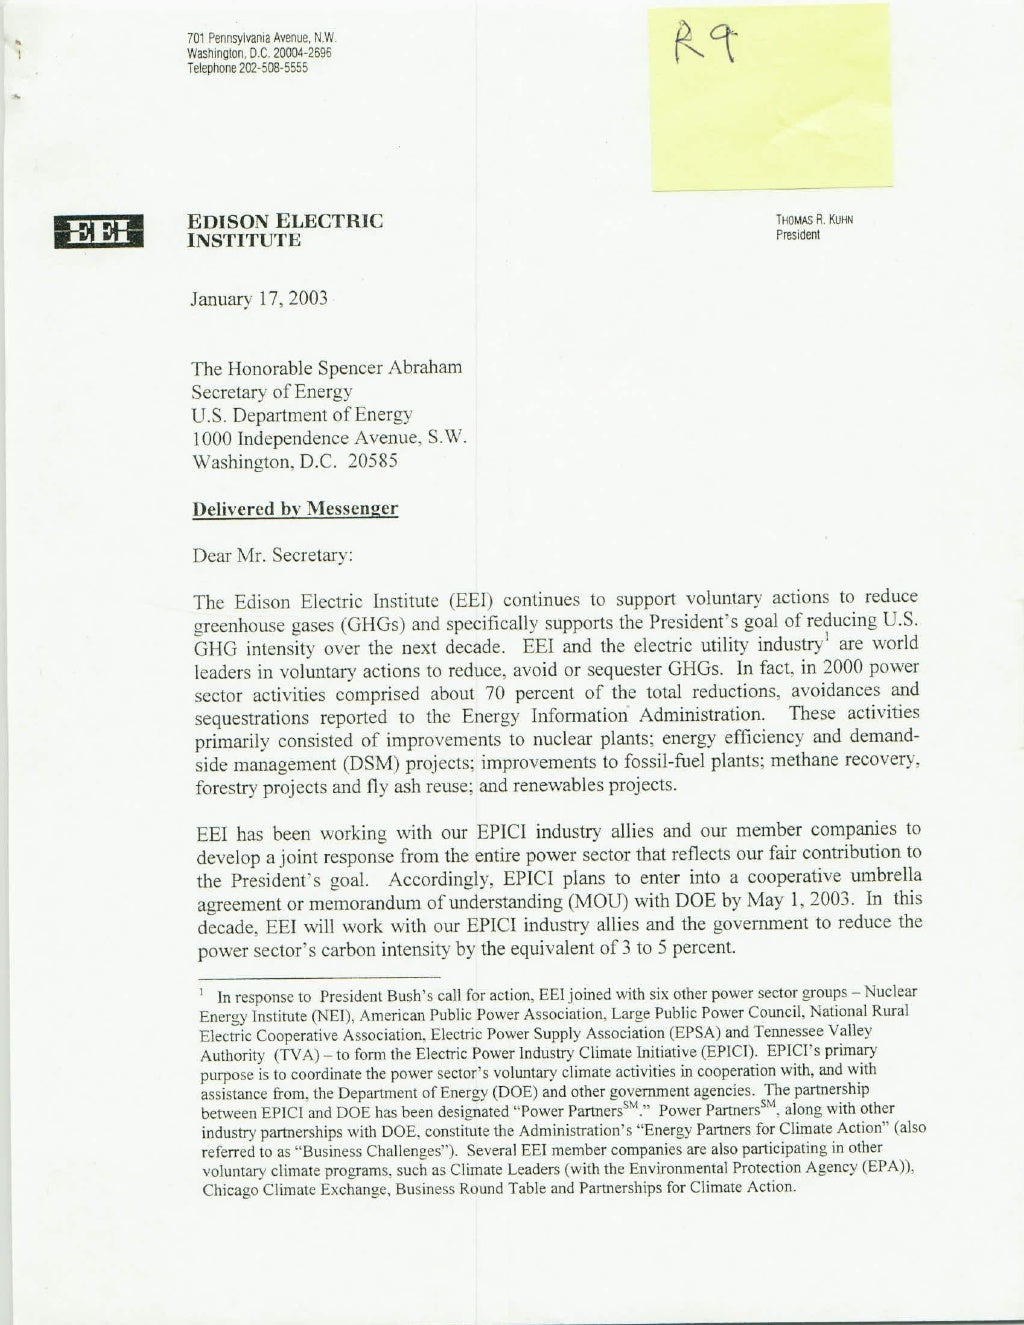 letter-from-edison-electric-institute-1-17-03